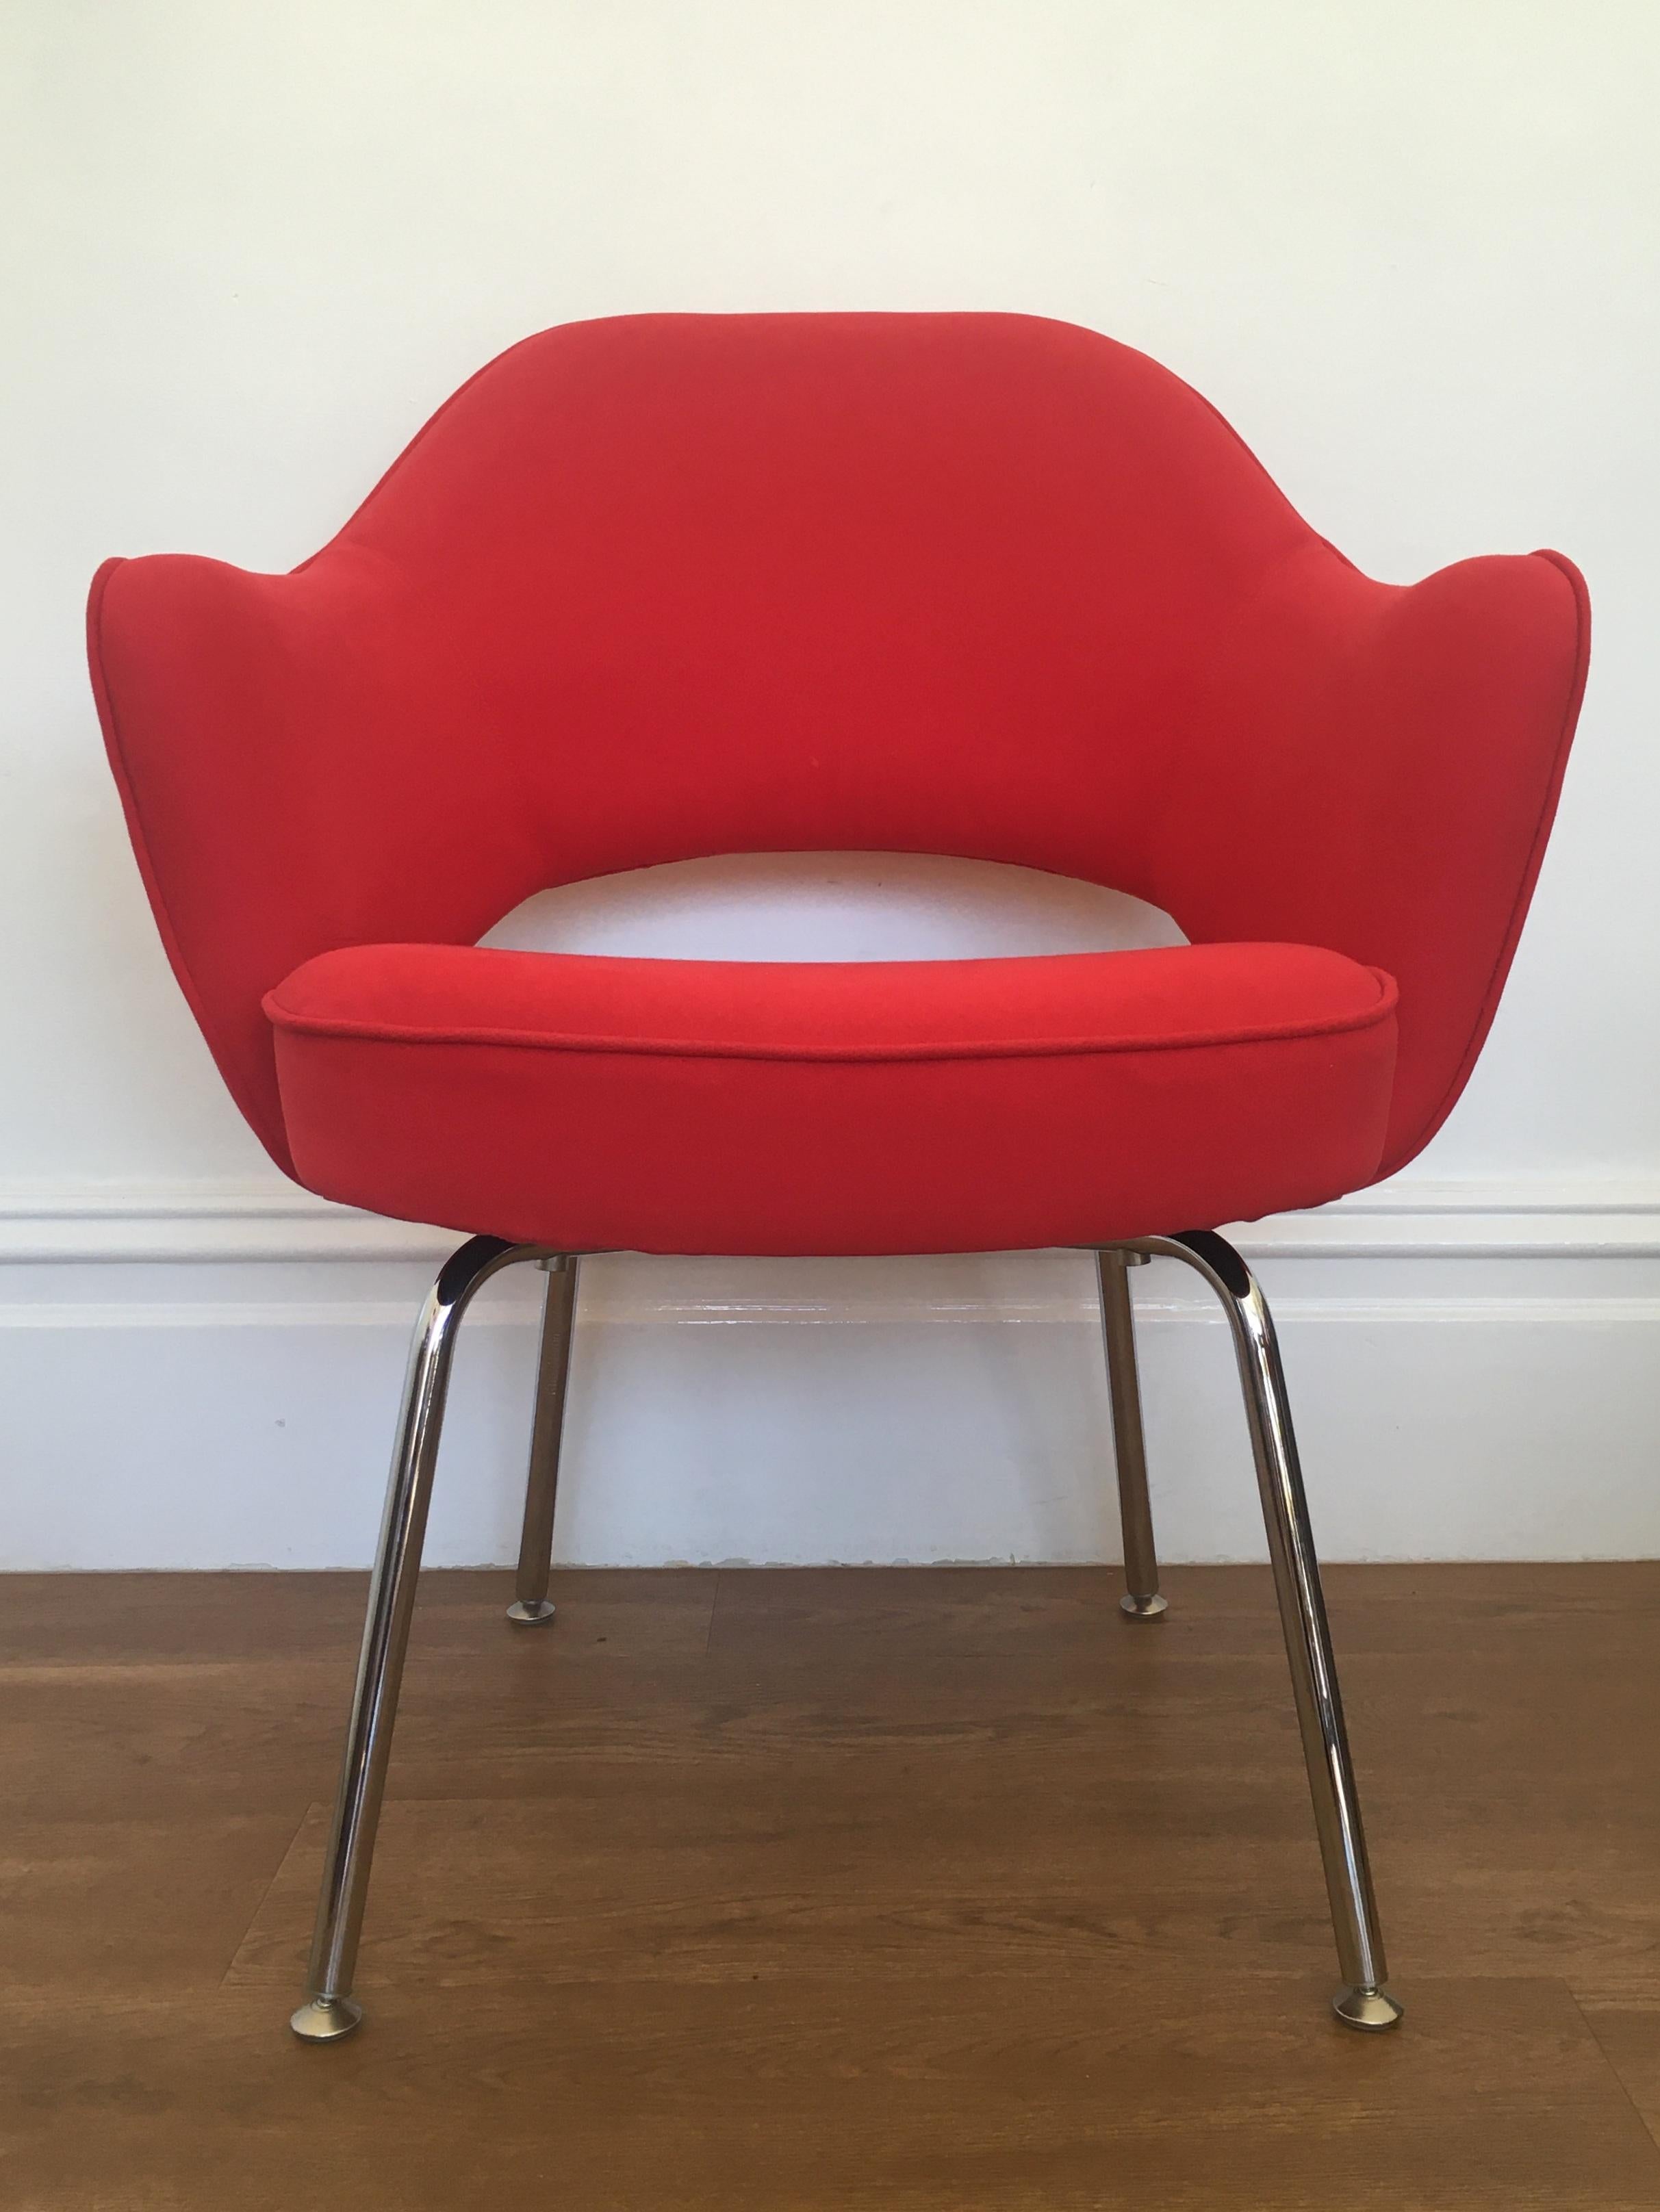 Knoll Studio Conference Armchair originally designed by Eero Saarinen in 1955. A superb, versatile chair suitable for lounge or dining area.

The chair was professionally reupholstered by it's previous owner in a soft felt like fabric and is in